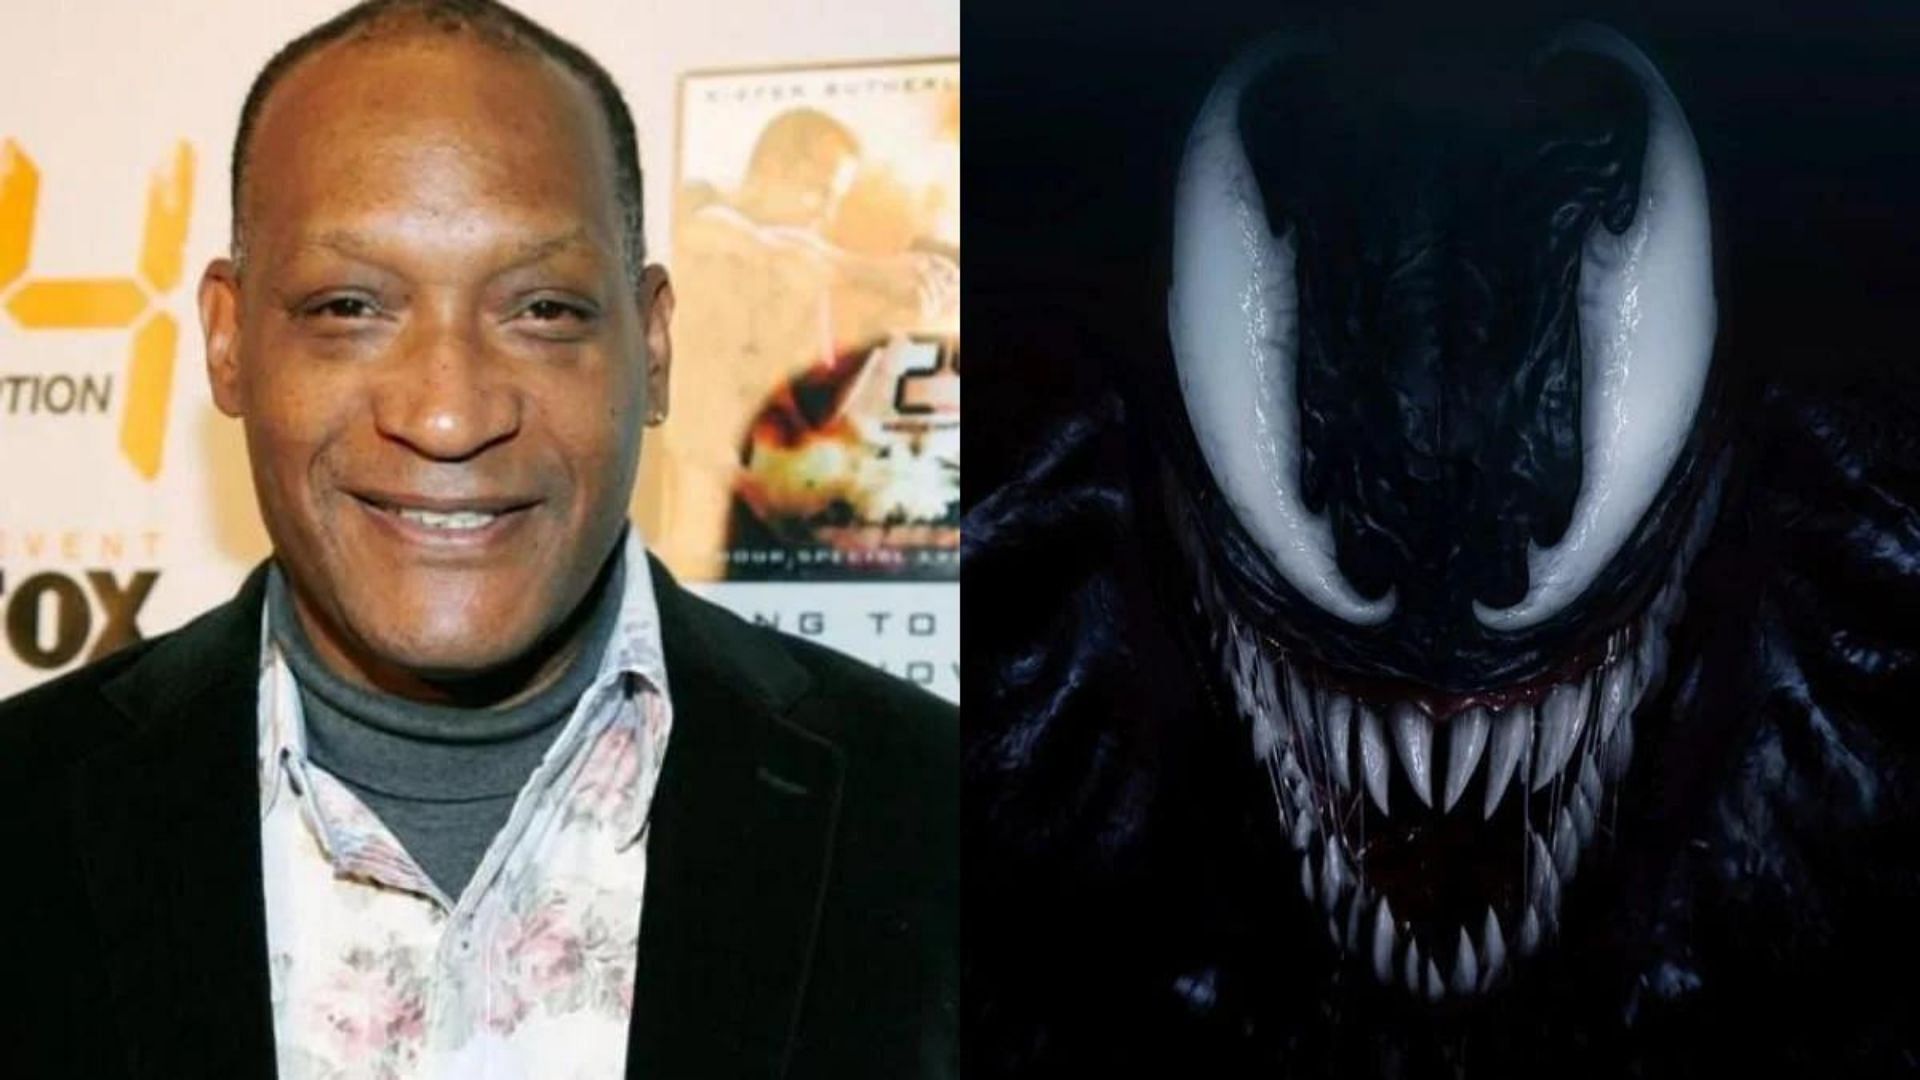 Venom voice actor Tony Todd says that Spider-Man 2 will be released on September followed by promotions in August (Image via iMDb/Insomniac Games)